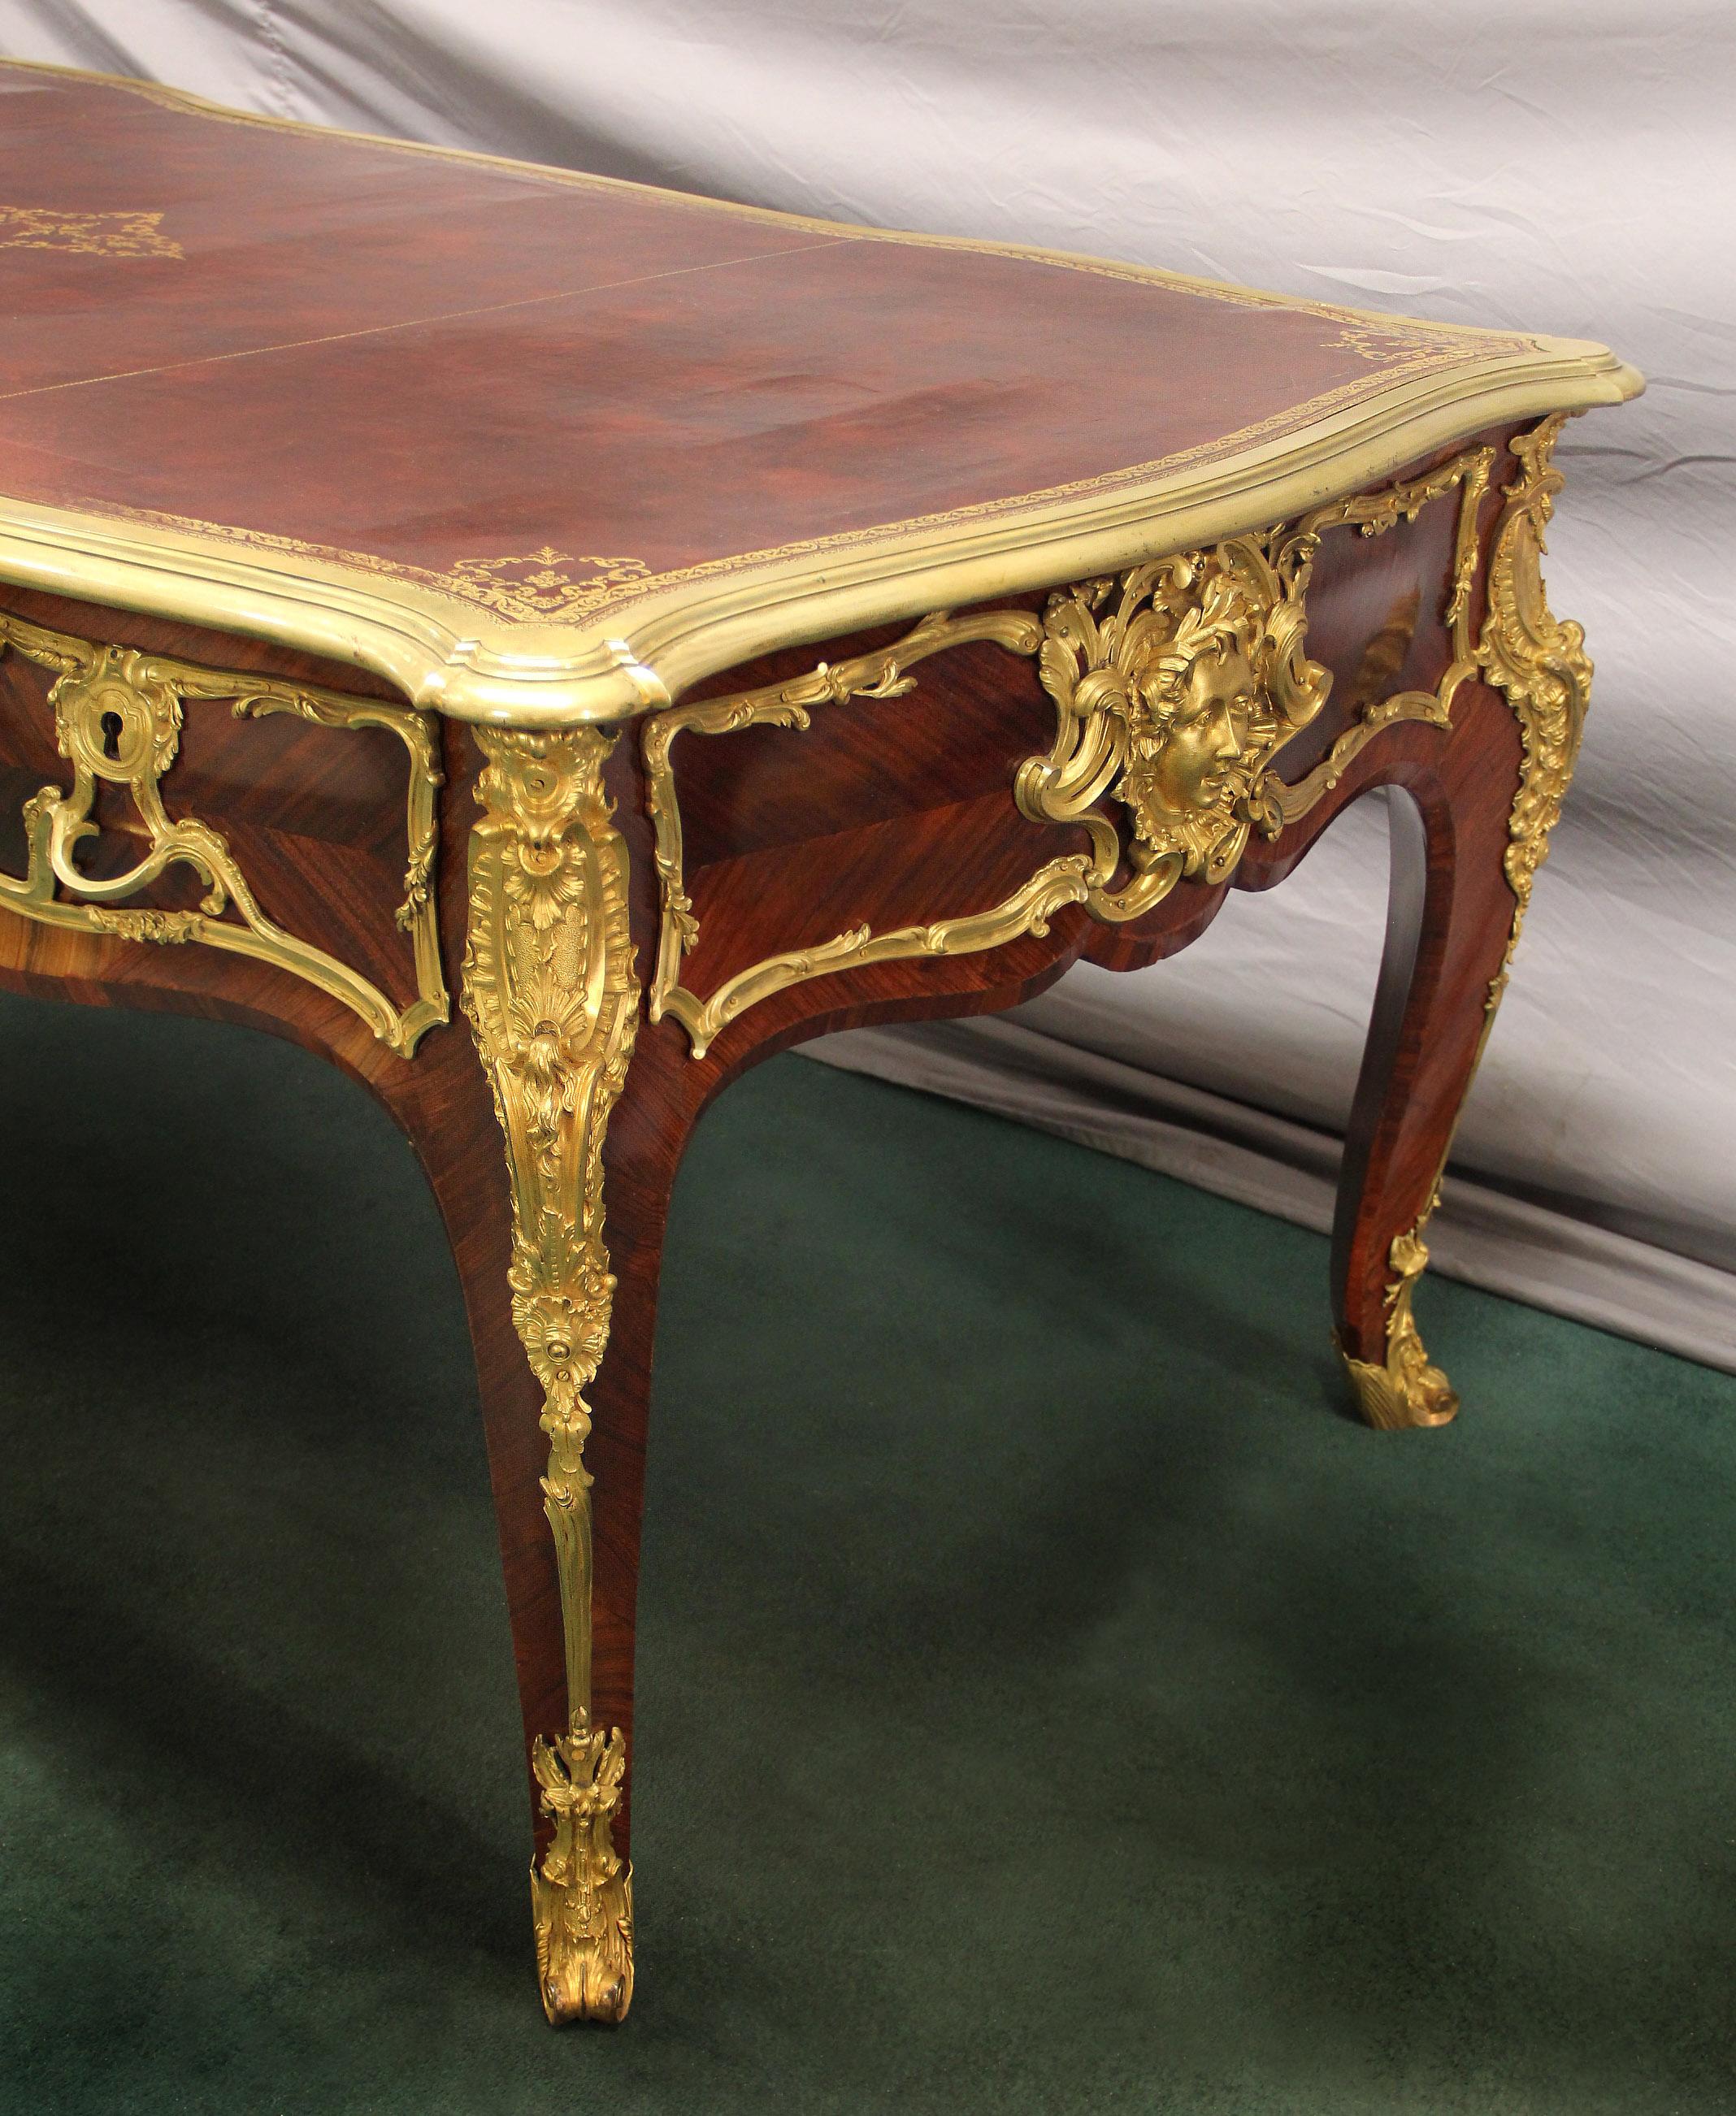 Rare Late 19th Century Gilt Bronze Mounted Bureau Plat Attributed to Zwiener For Sale 1